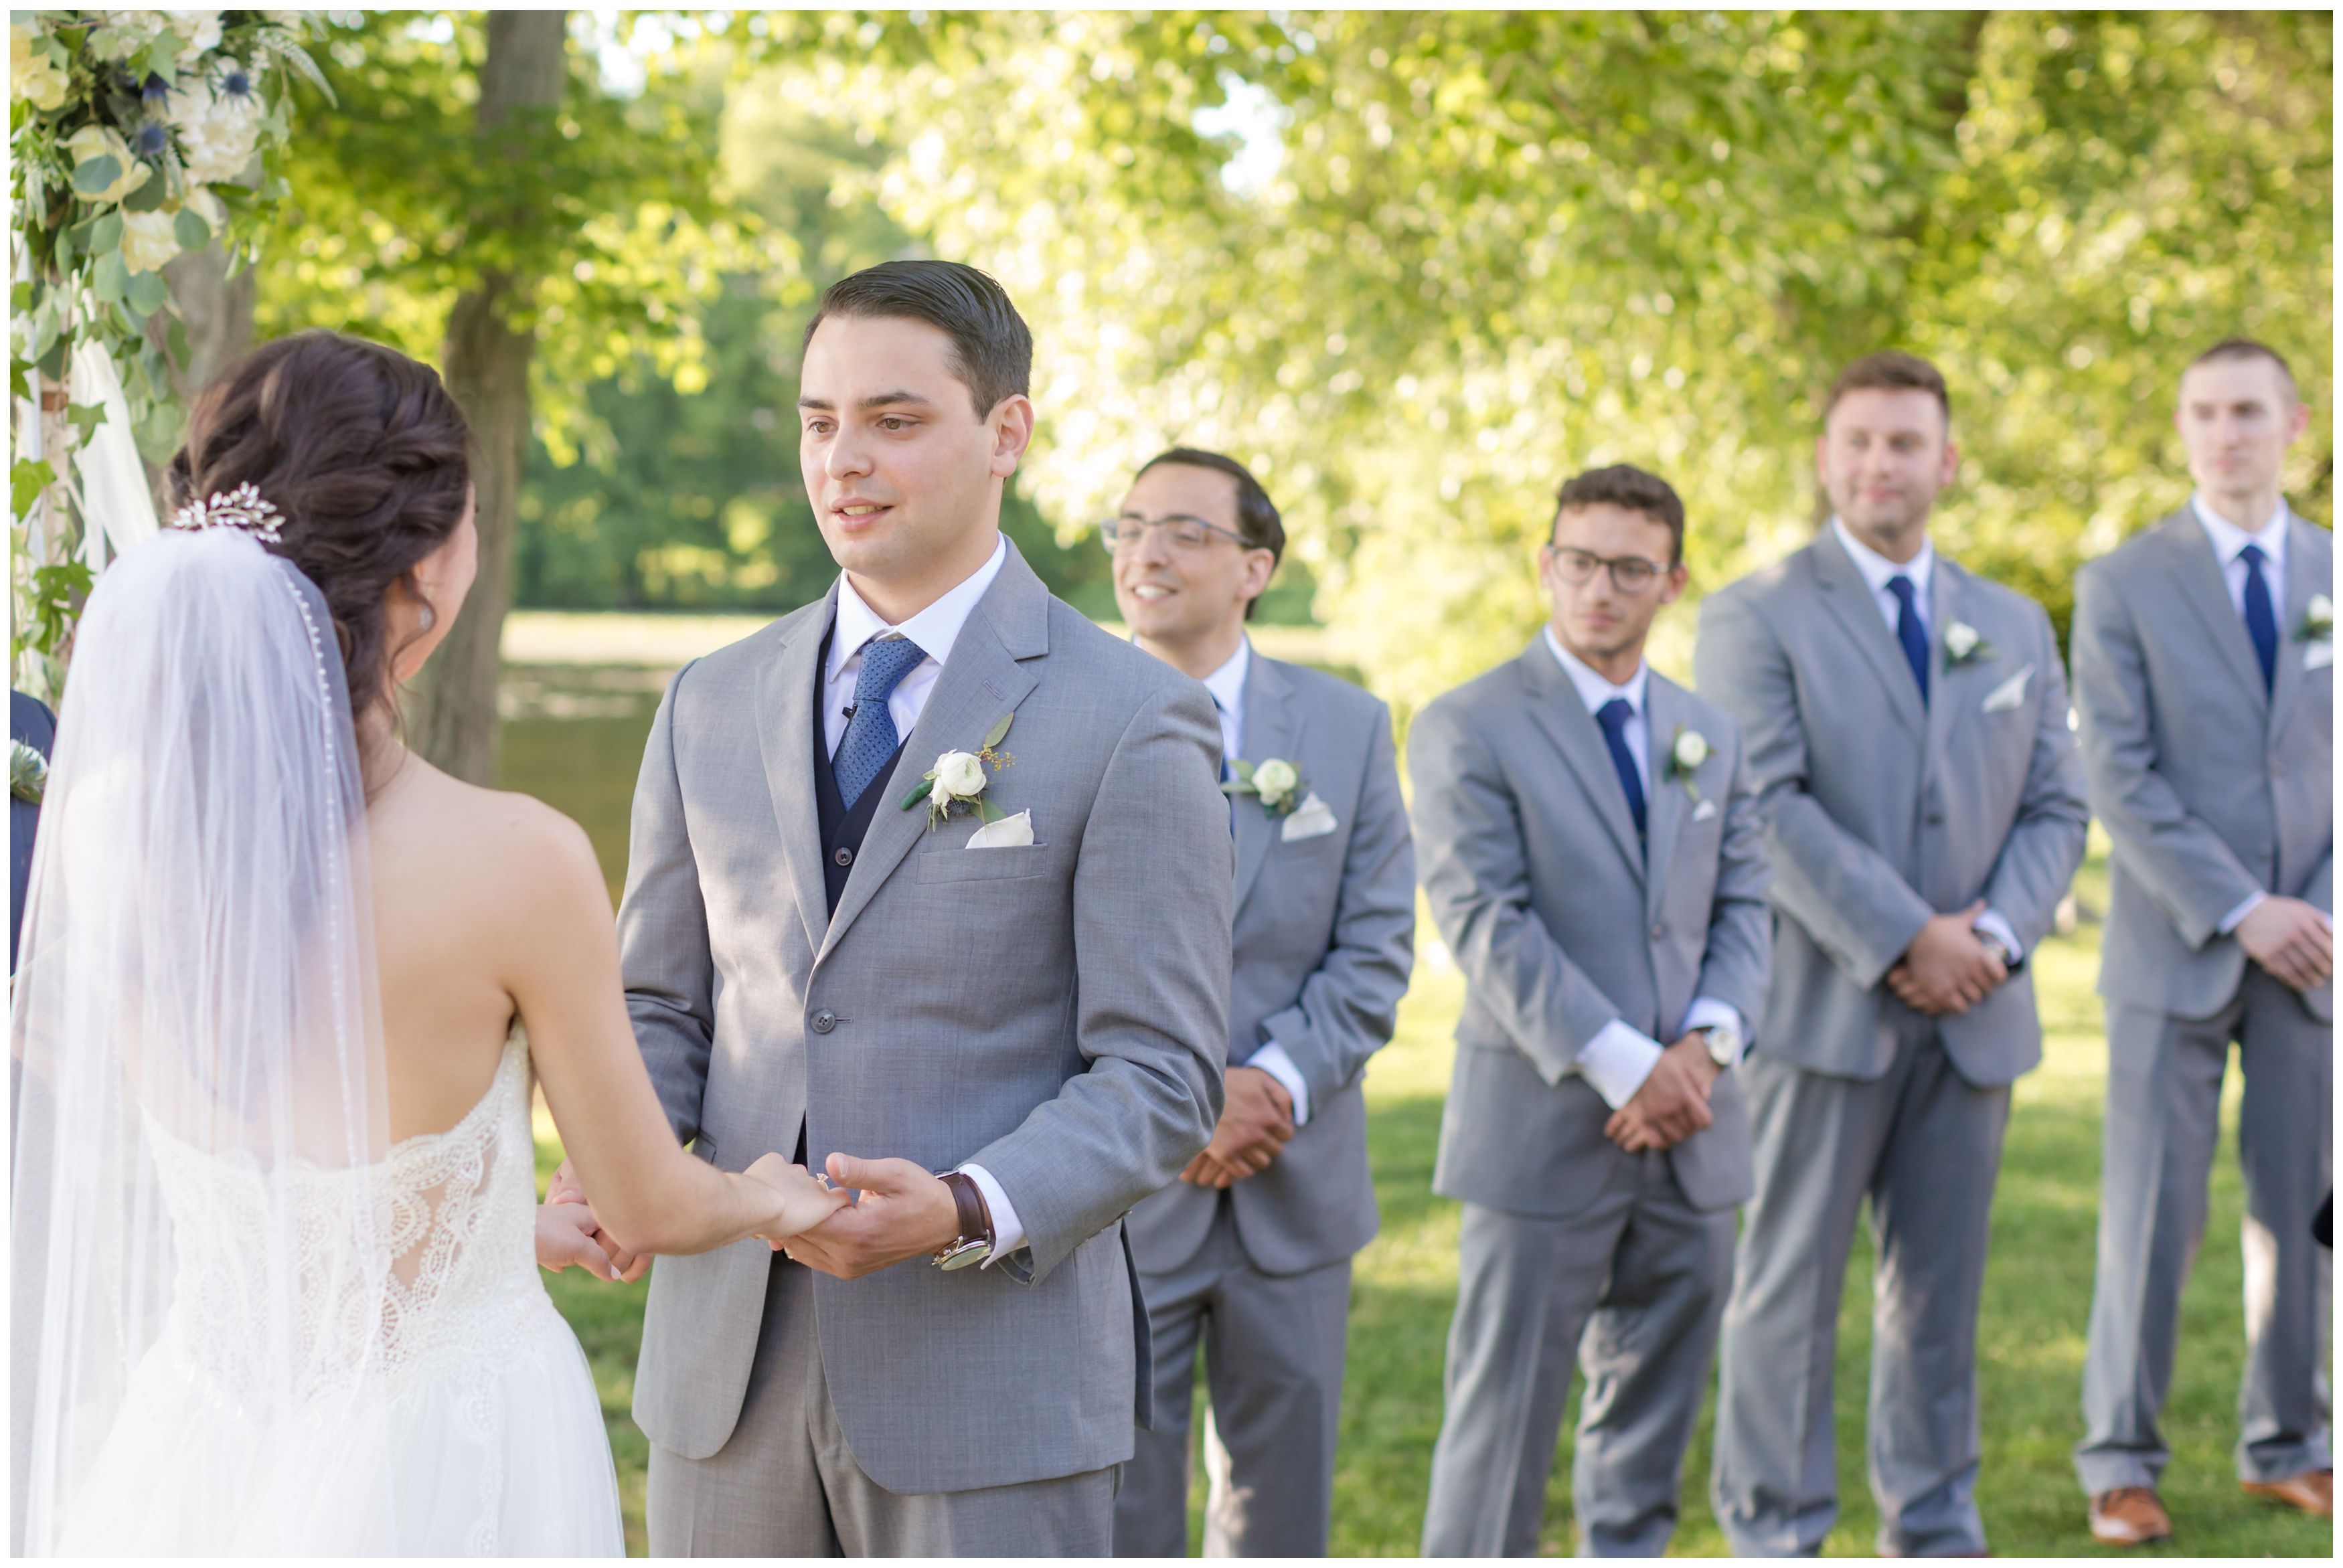 Groom looking at bride at outdoor lakeside ceremony